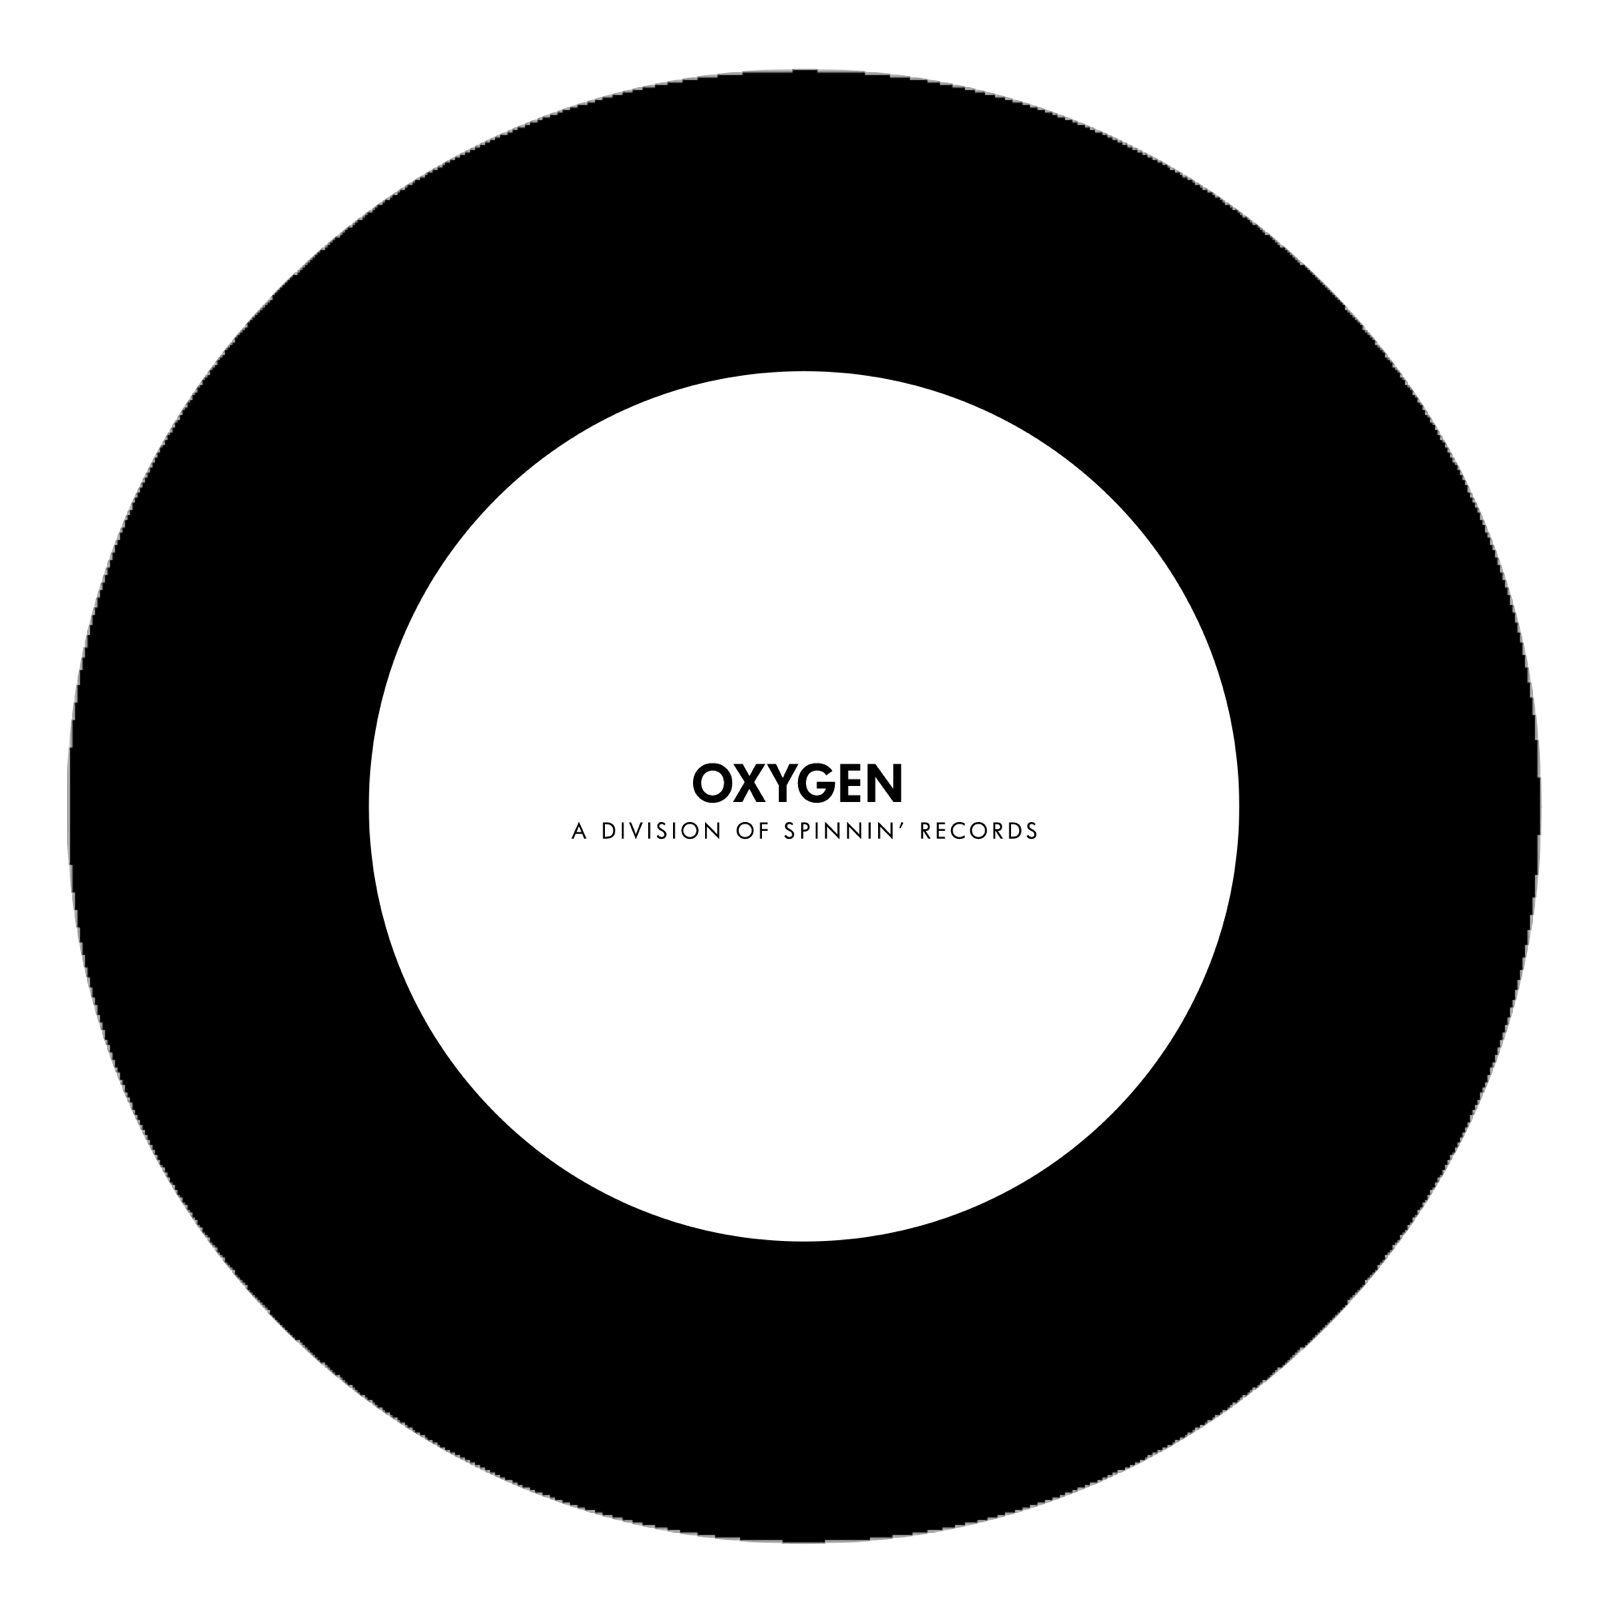 Black Record Logo - File:Oxygen (record label) logo 2014.png - Wikimedia Commons